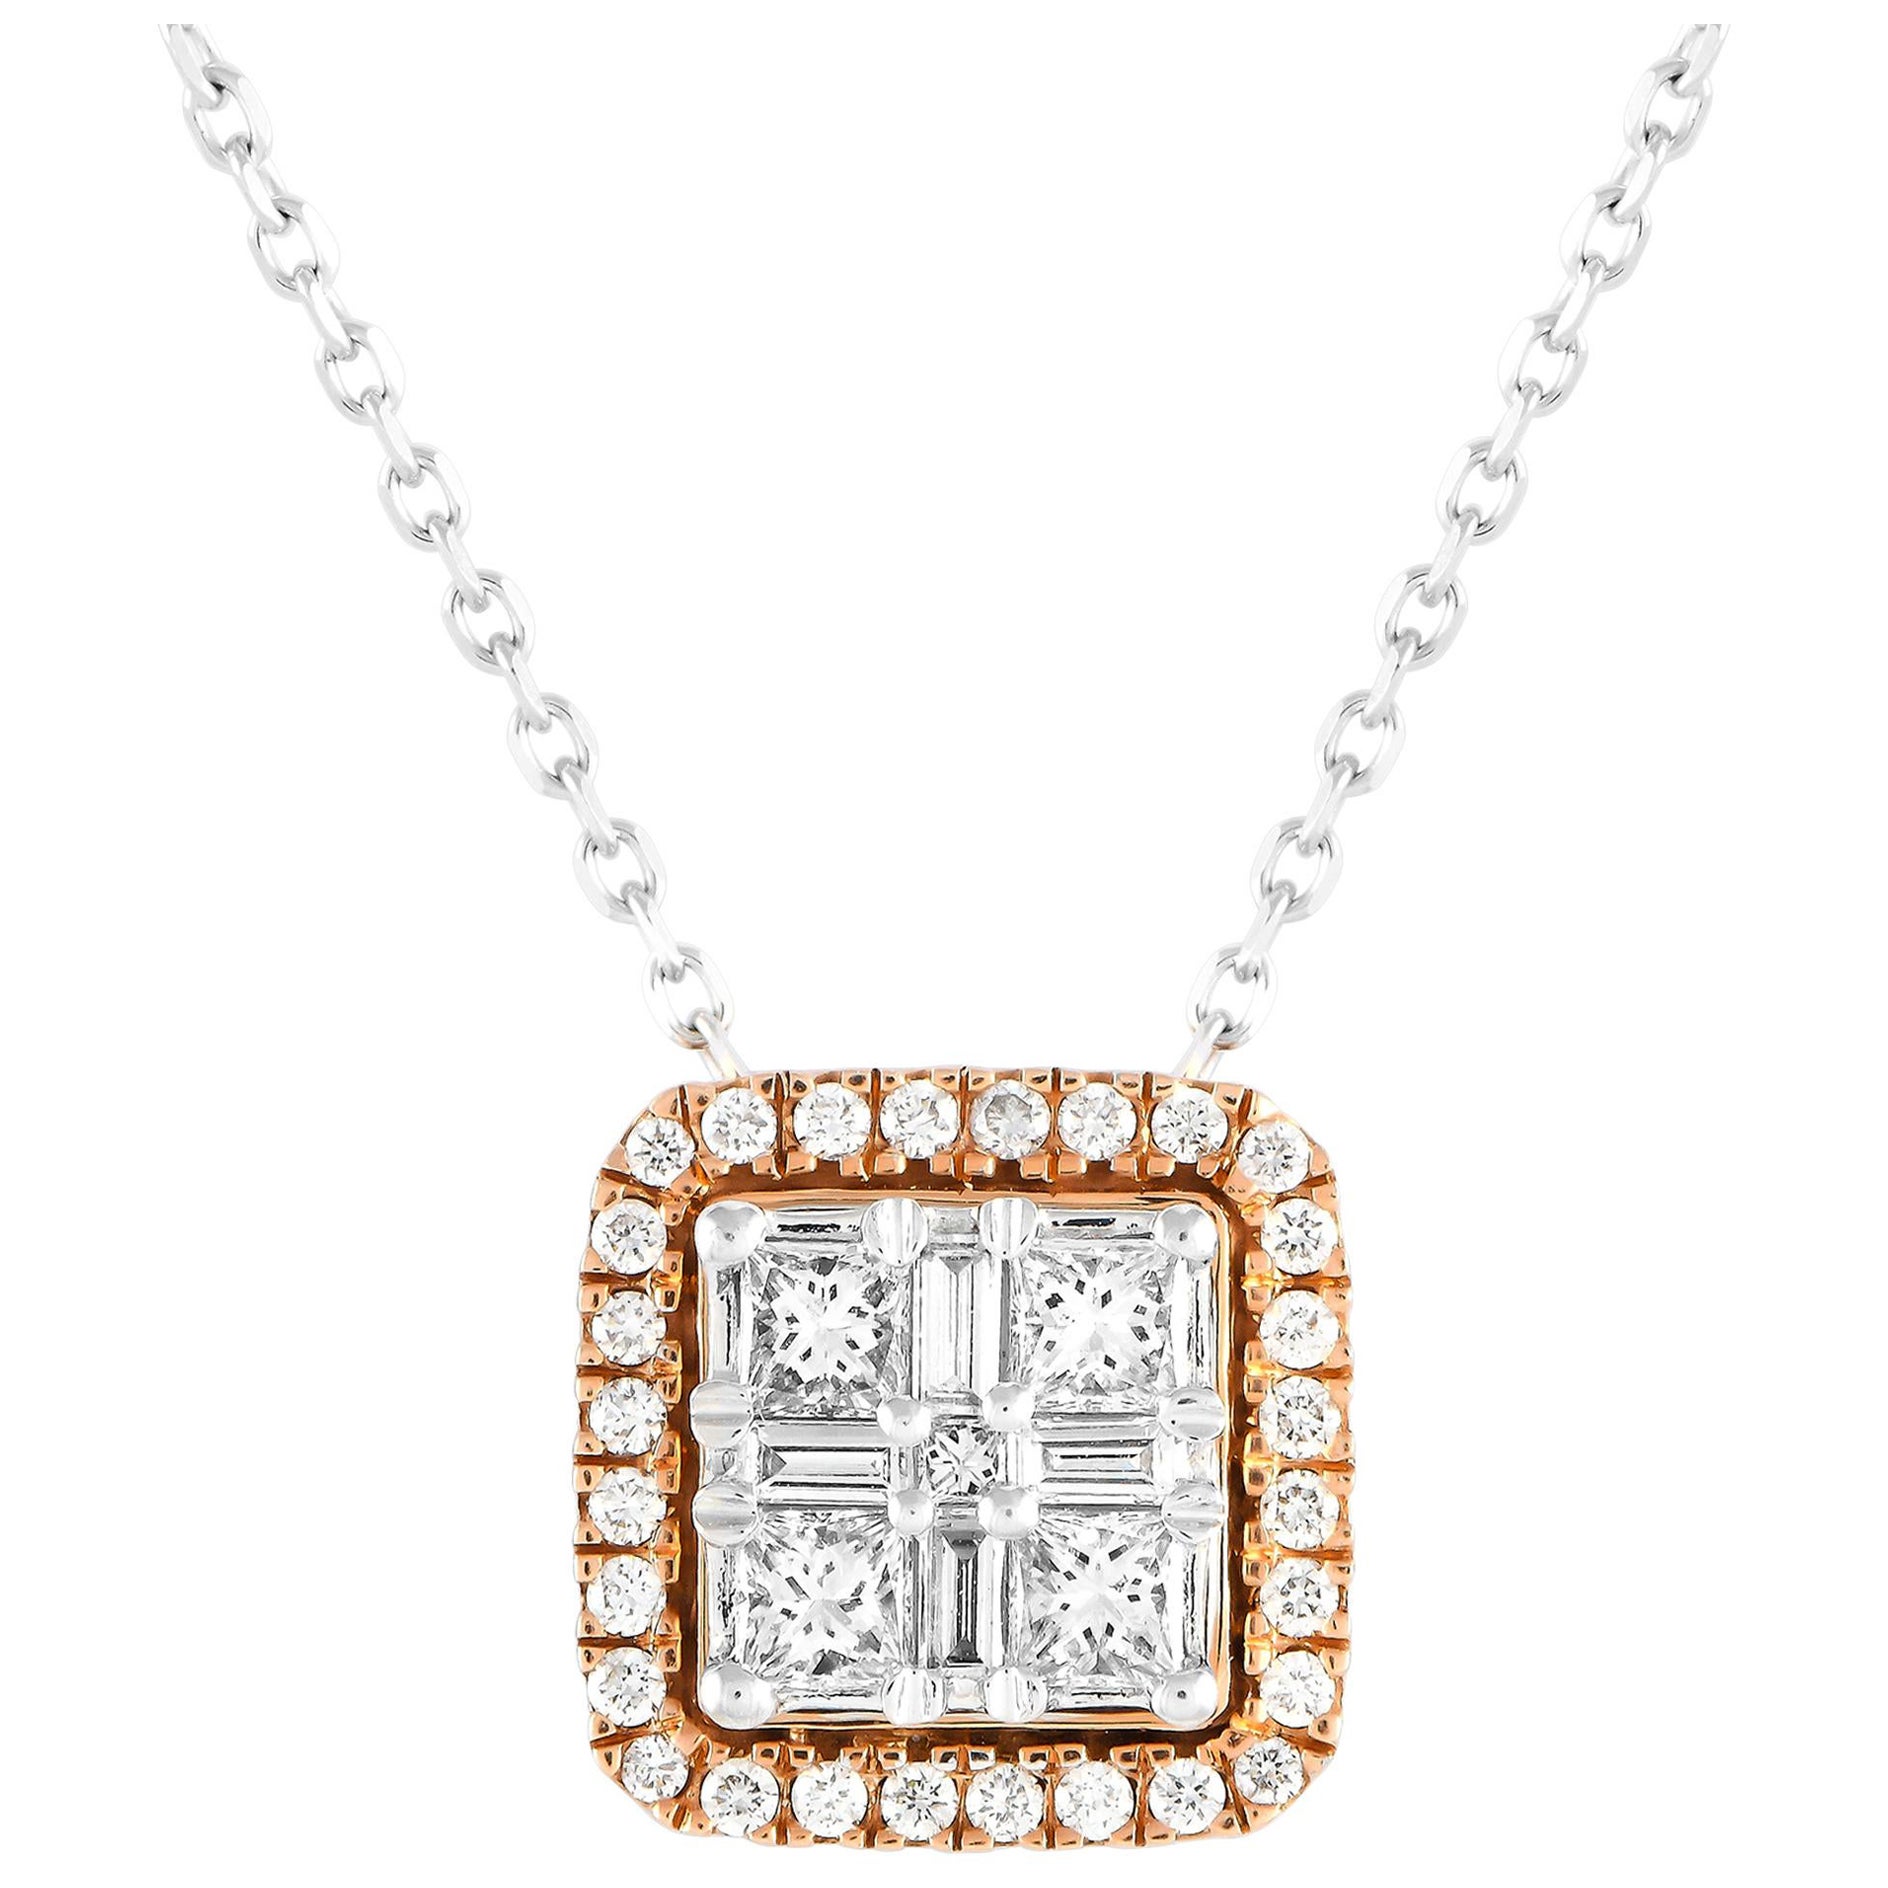 LB Exclusive 14K White and Rose Gold 0.50ct Diamond Cluster Necklace PN14658 For Sale